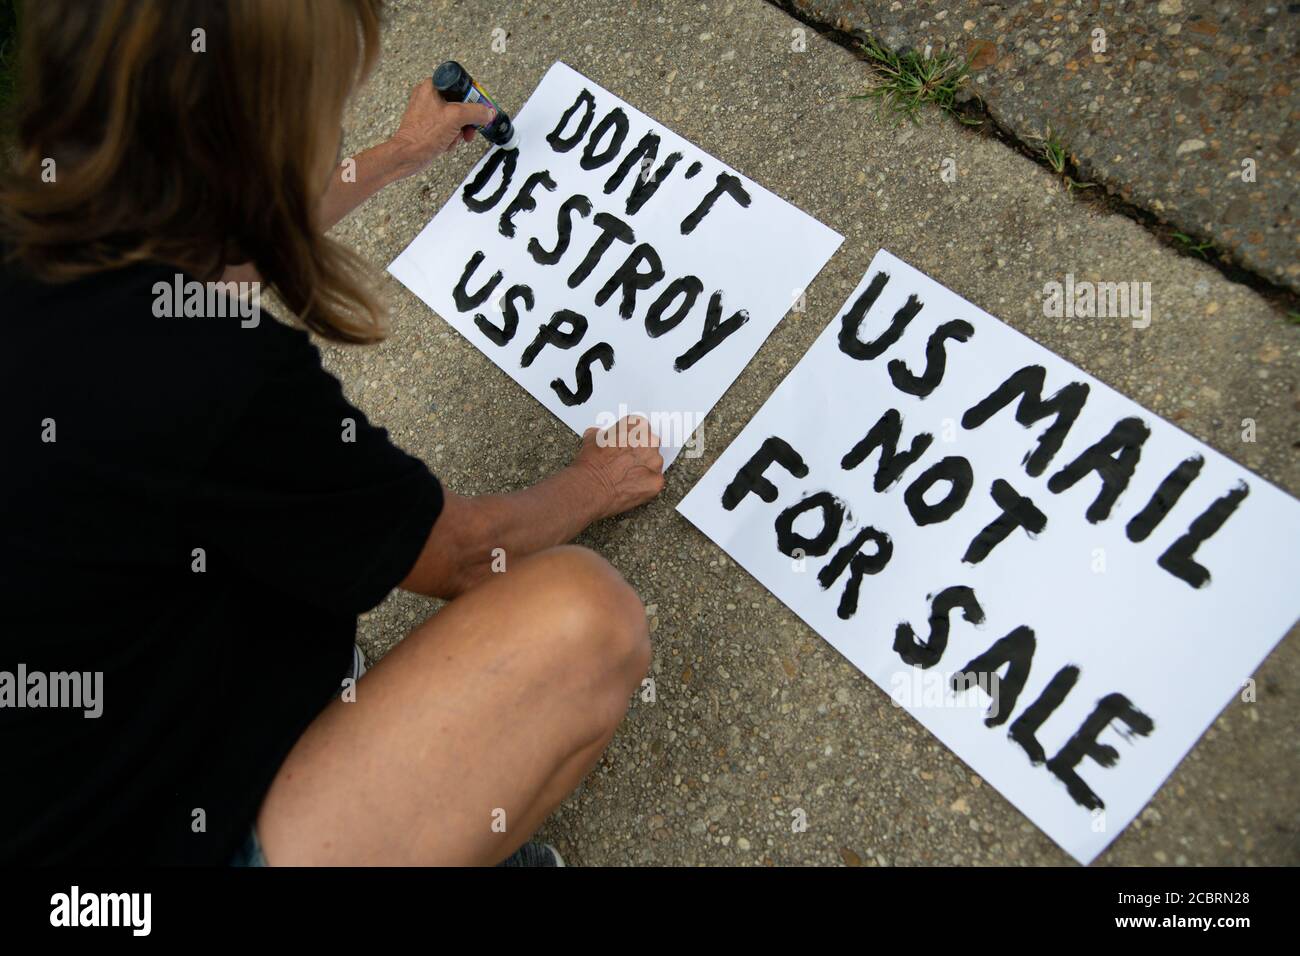 A posters makes signs before marching to the residence of Postmaster General Louis DeJoy - a major Republican donor who President Trump recently nominated to run the United States Postal Service (USPS) despite concerns about conflicts of interest and lack of experience - to demonstrate against Dejoy's changes to the USPS, which many say are acts of sabotage to increase Trump's chances in a mostly vote-by-mail election in Washington, DC, on August 15, 2020, amid the coronavirus pandemic. DeJoy reportedly has invested tens of millions of dollars in direct USPS competitors, and recently he has Stock Photo